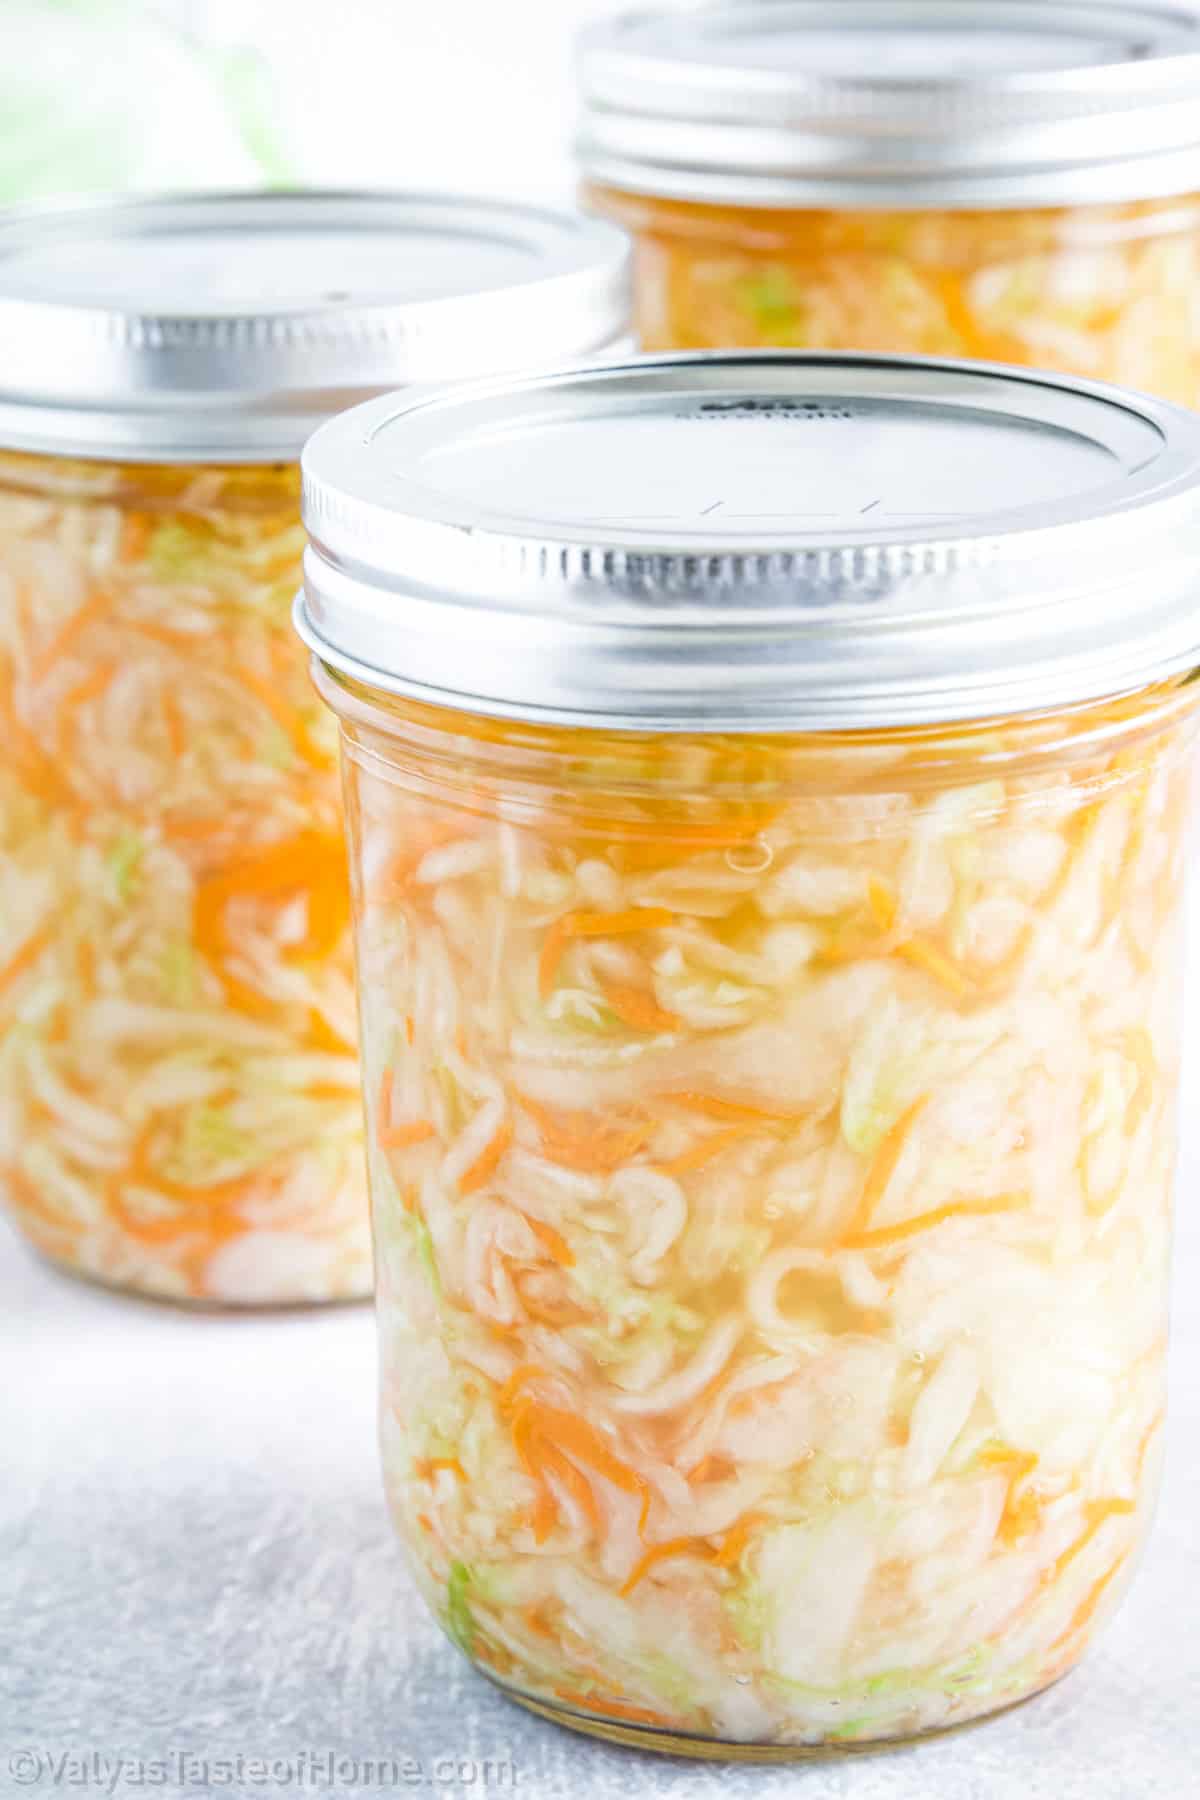 With just three simple ingredients, cabbage, carrots, and sea salt, you’ll be able to make the most delicious one you’ve ever had!